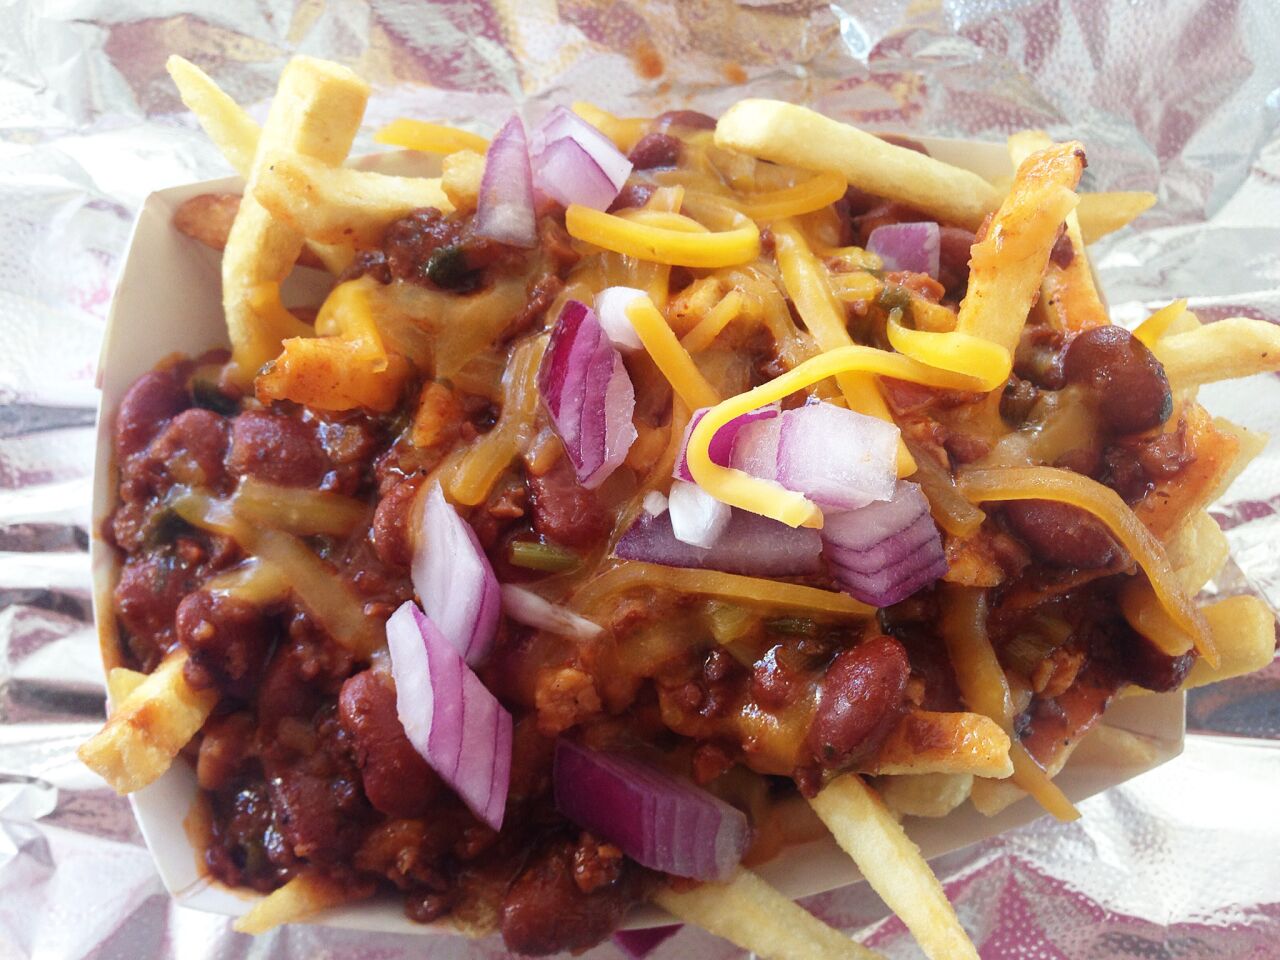 The vegetarian chili cheese fries from Earlez Grille.